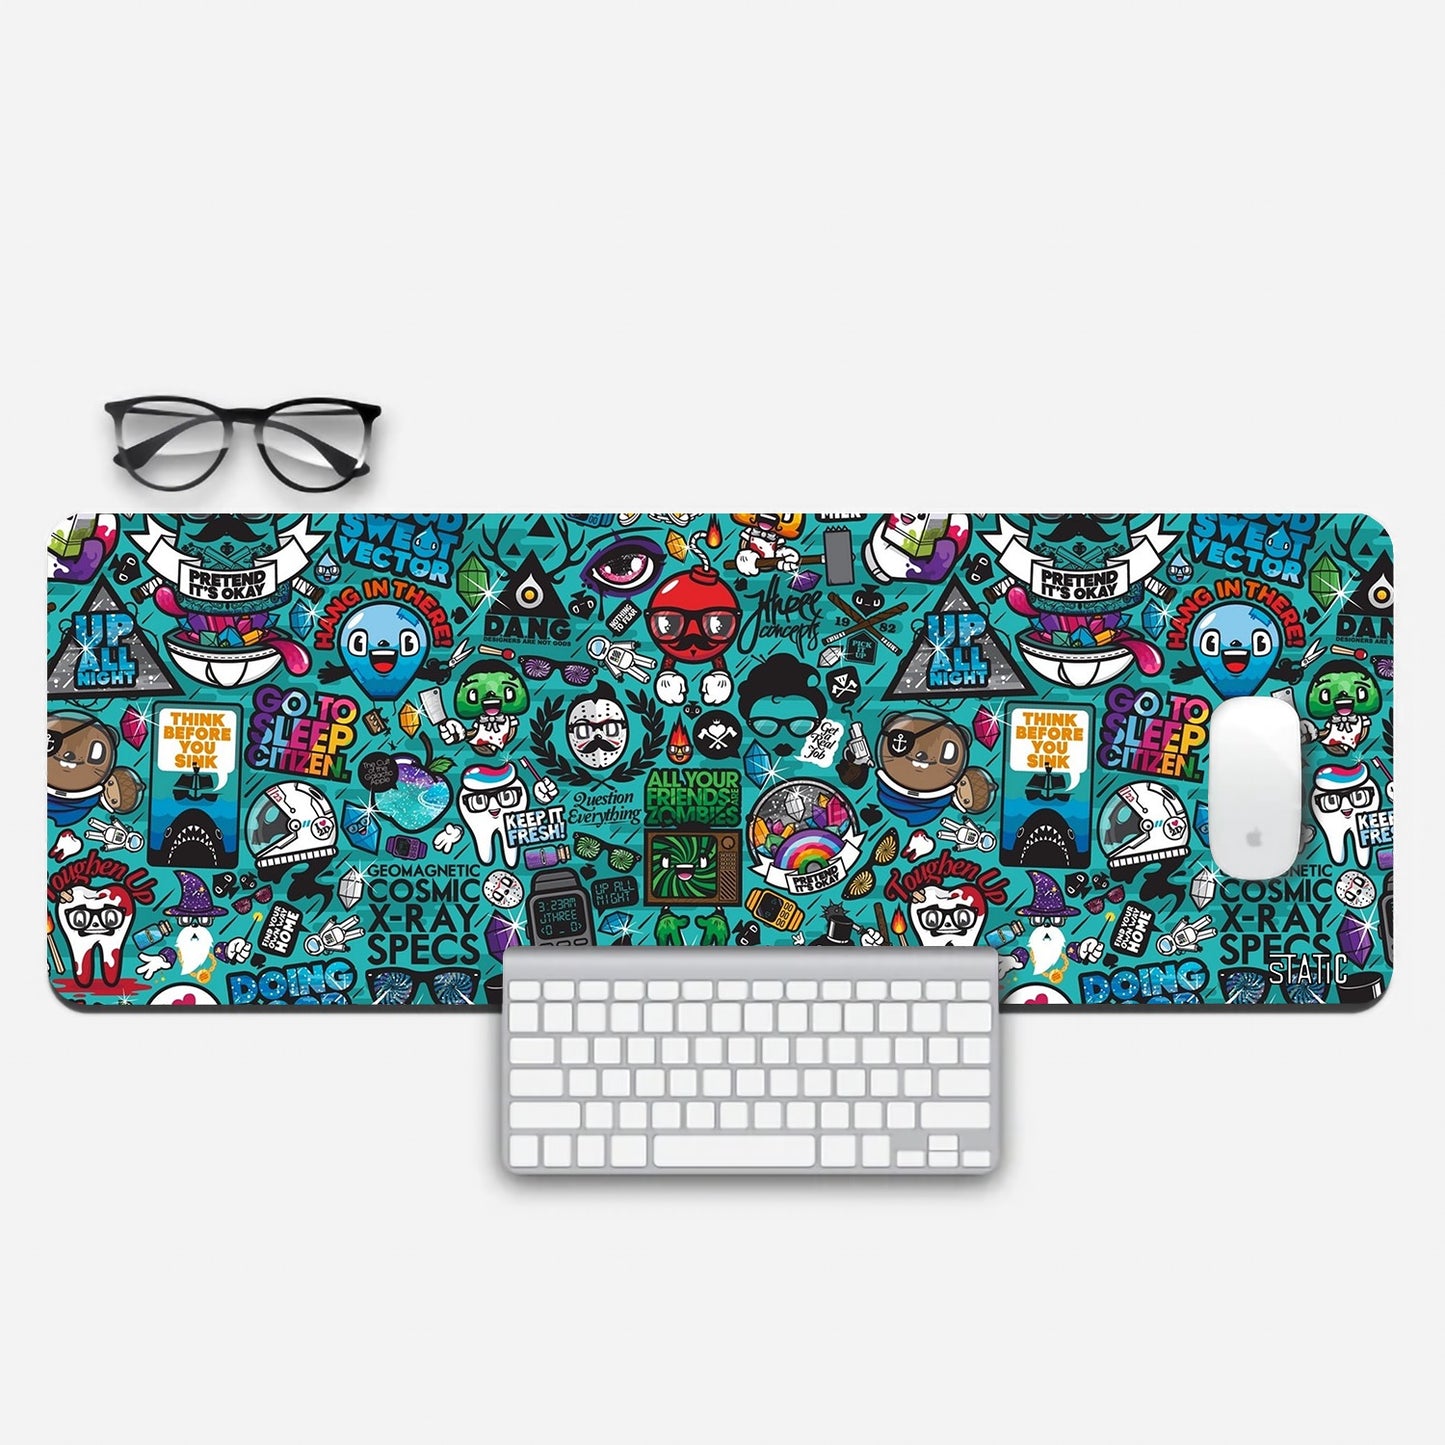 Elevate your gaming experience with our Extended Gaming Mouse Pad, featuring a captivating collage of random doodles, inspiring quotes, and quirky cartoon characters. Measuring 800x300mm, it offers ample space for precise mouse control while adding a touch of whimsy to your gaming setup. The skid-proof backing ensures stability during intense gameplay. Level up your gaming style and motivation with this unique and functional mouse pad.